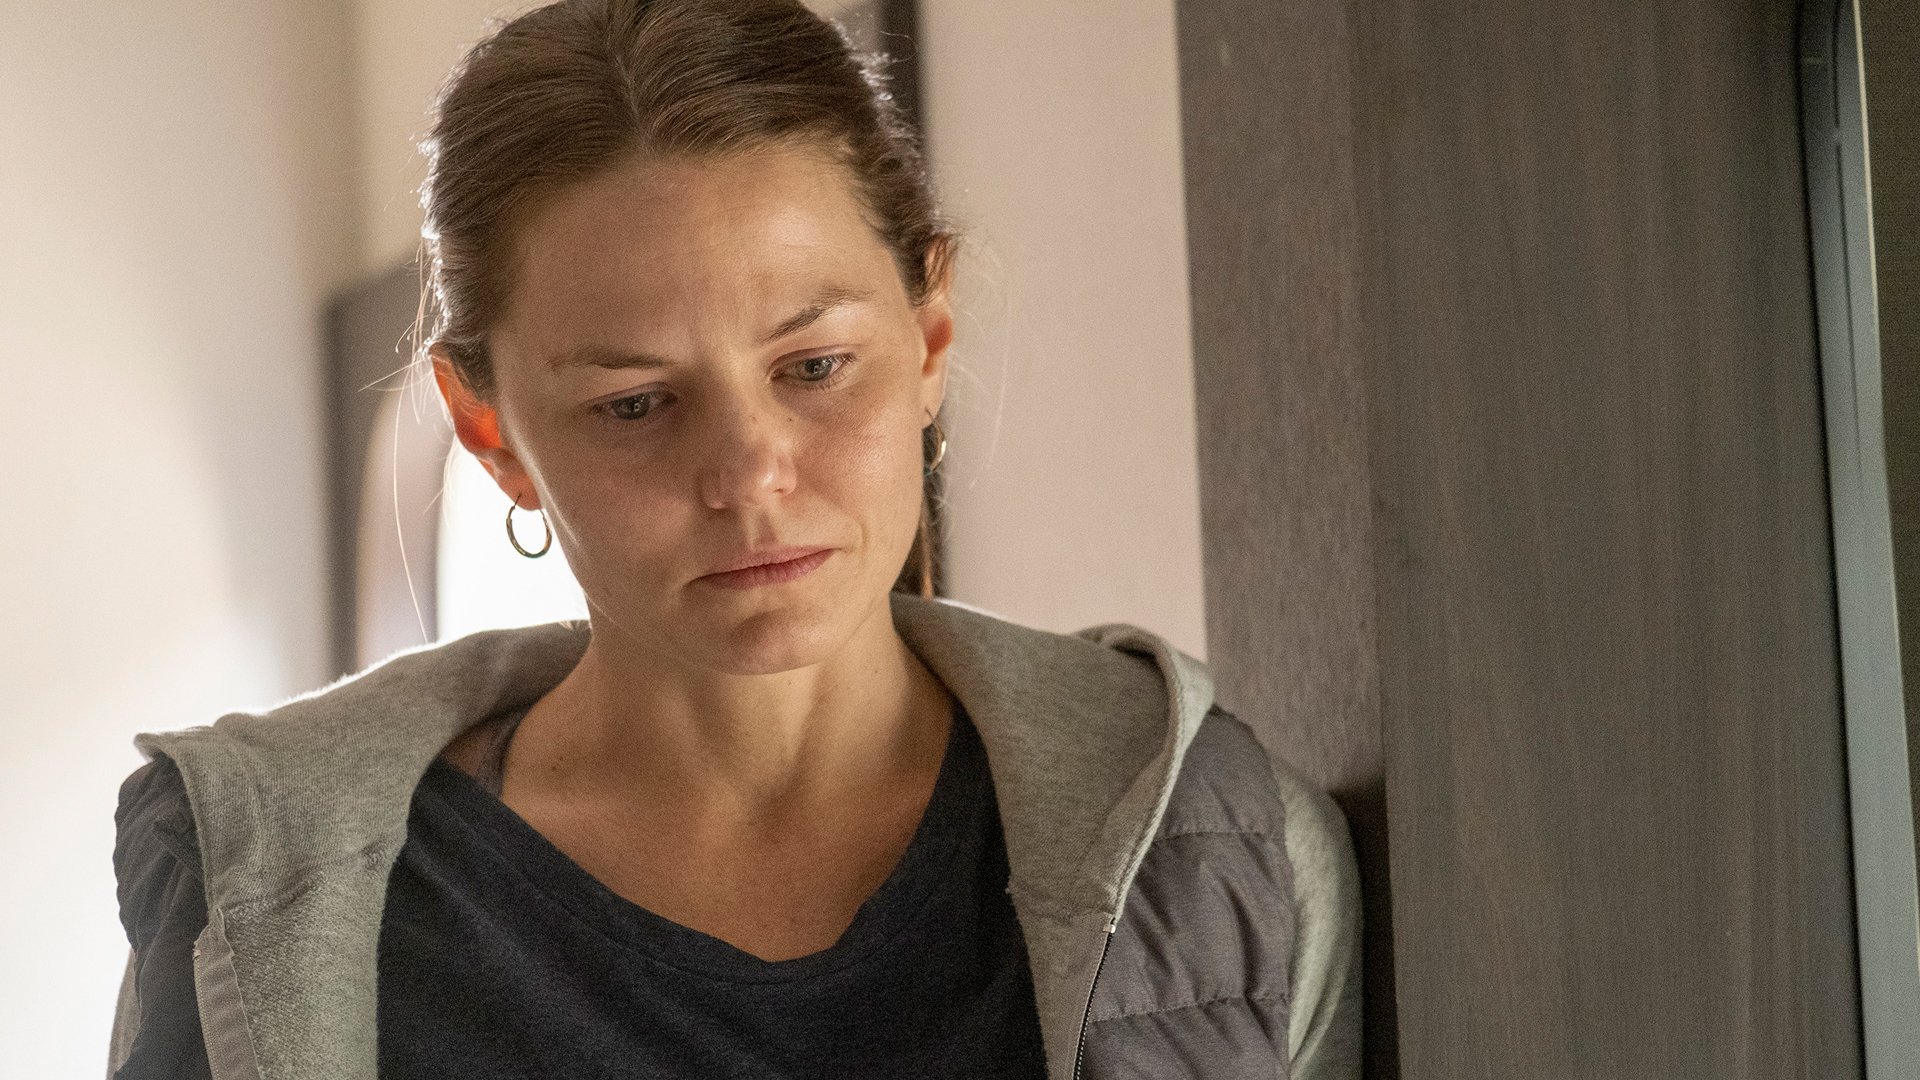 Jennifer Morrison as Cassidy Sharp looking down in ‘This Is Us’ Season 4 Episode 18, “Strangers: Part Two.”